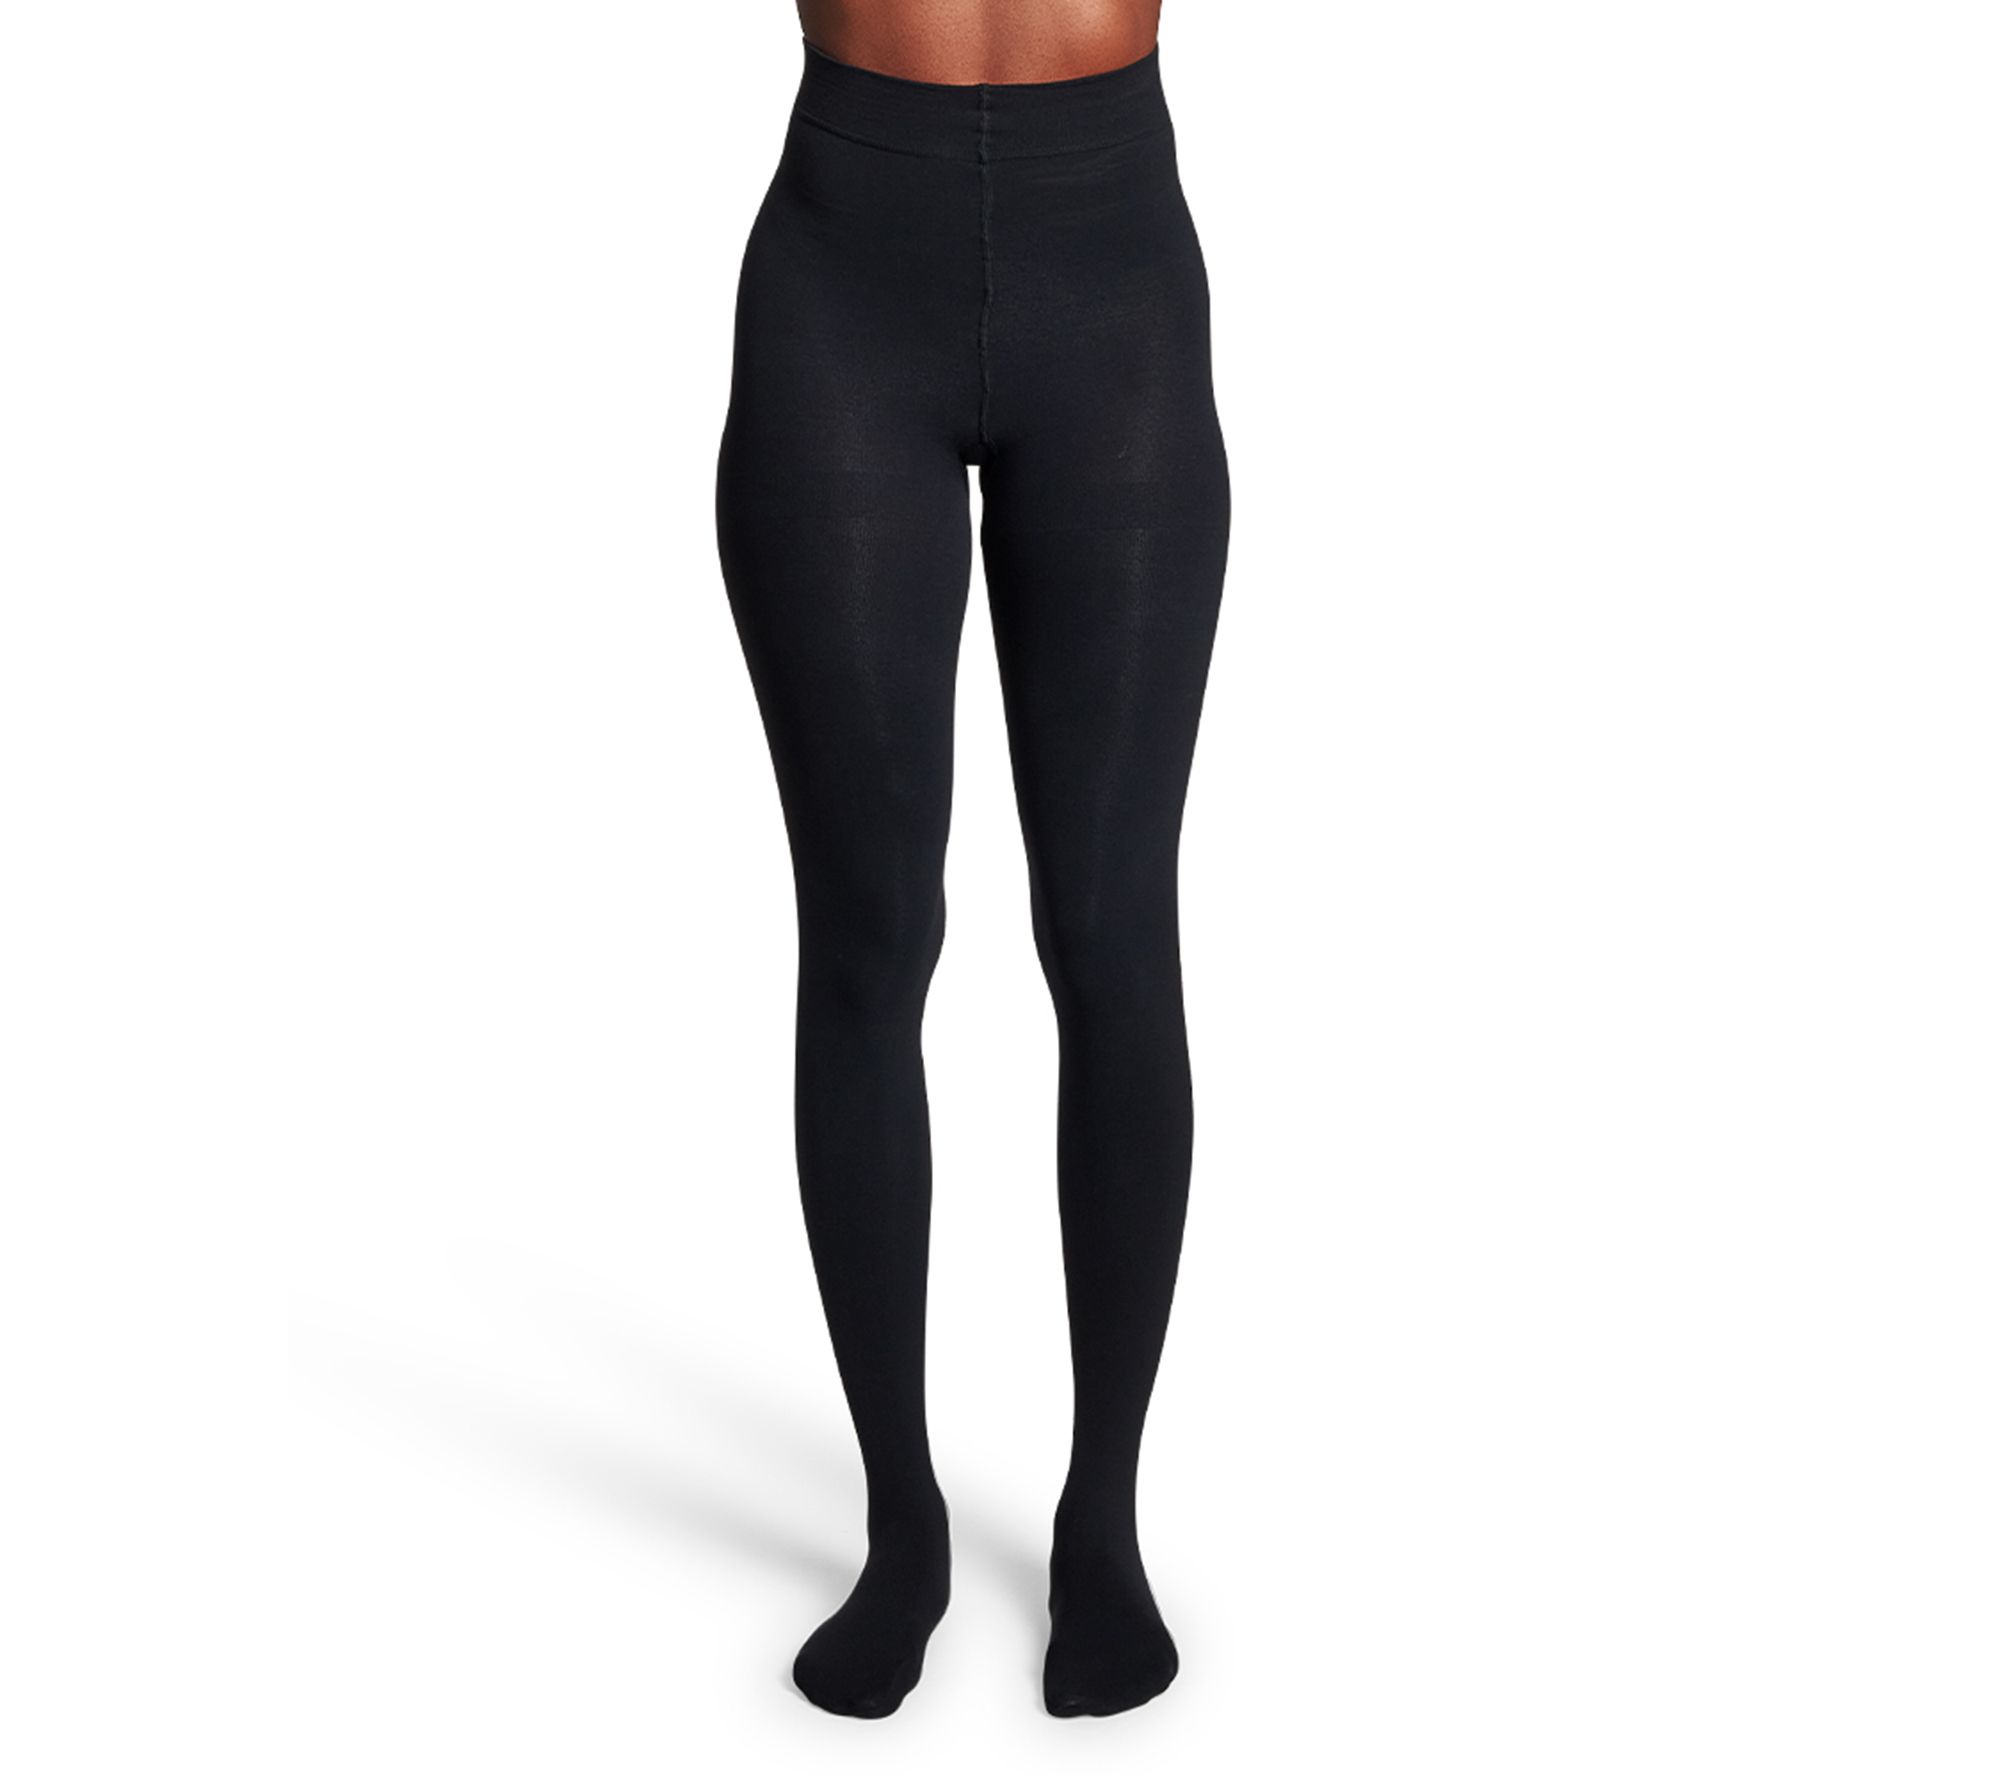 Tommie Copper Seamless Compression Leggings on QVC 